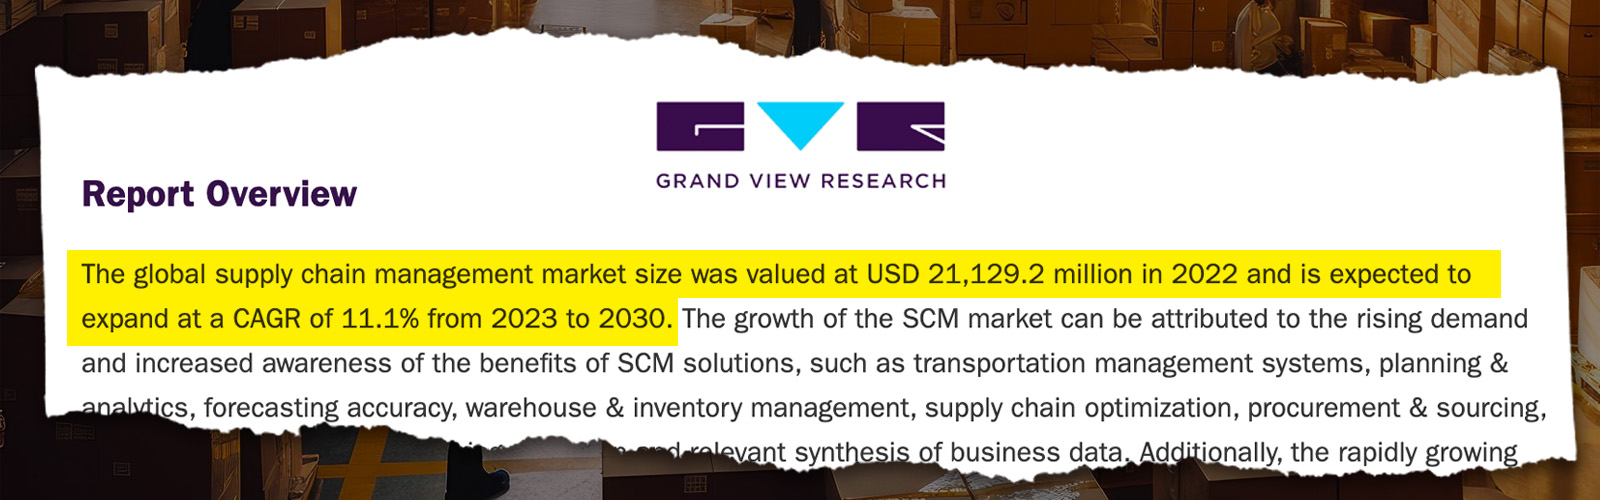 Key Stats on supply chain management market size